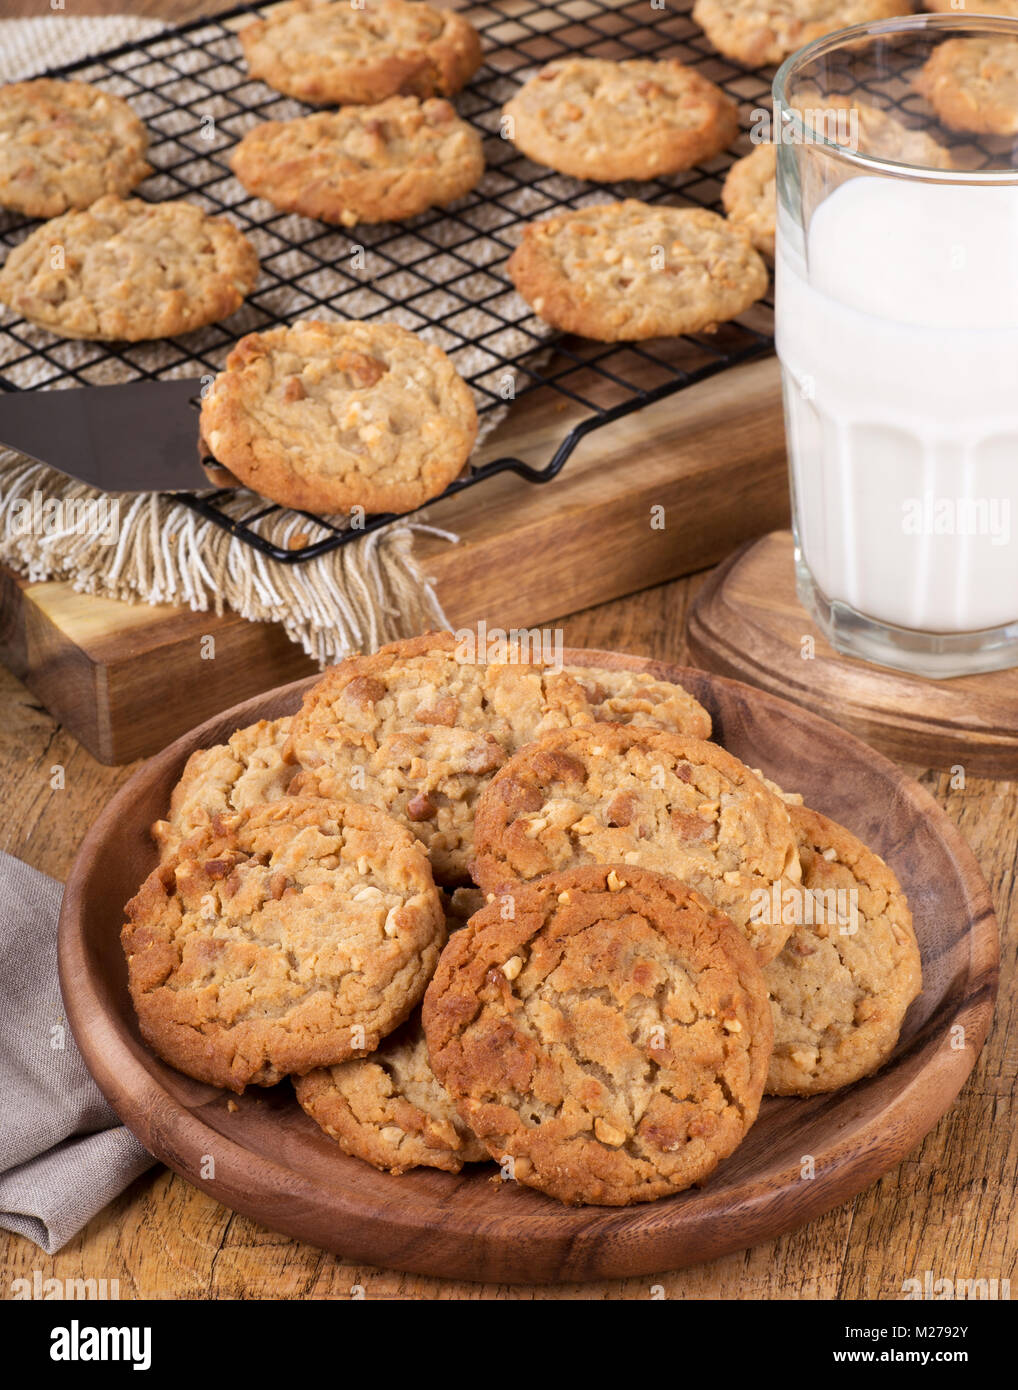 Peanut butter cookies on a wooden plate with cookies on a cooling rack and glass of milk in background Stock Photo